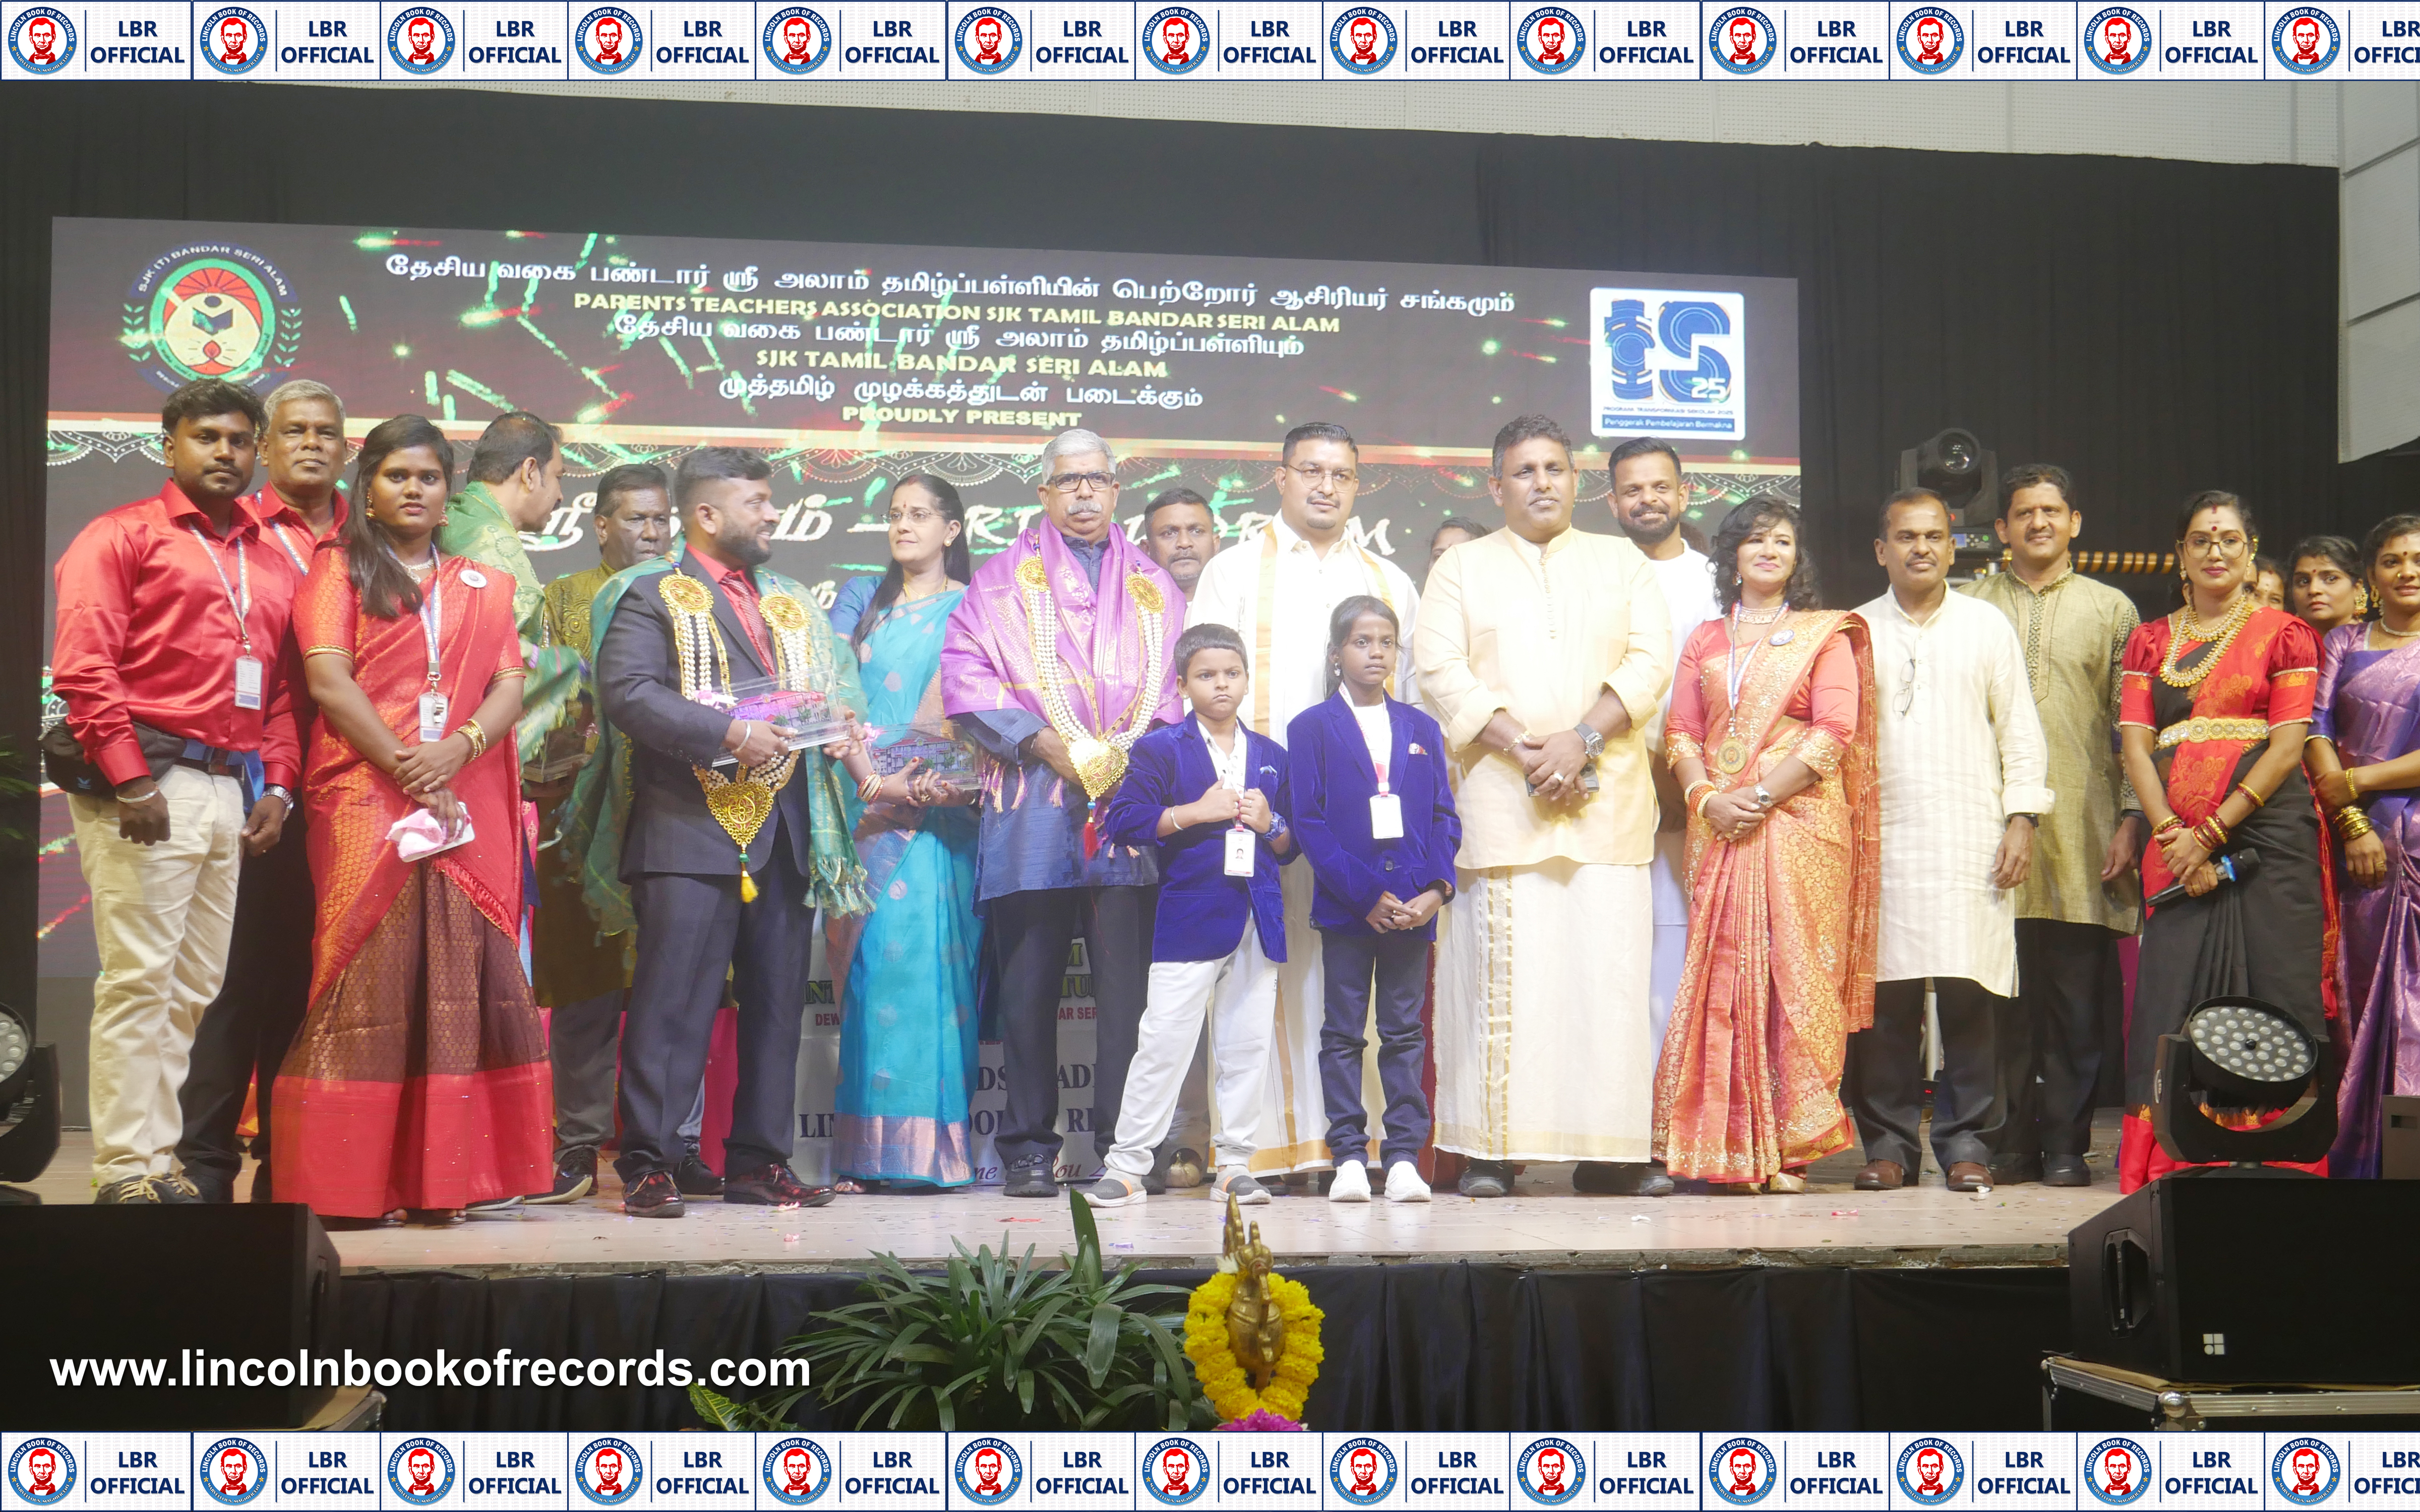 World Record by organising 500+ multi-racial people across 5 different  nations to perform multiple Tamil cultural Dance performances in the  name,"Sri Rudram International Cultural fest " at one place